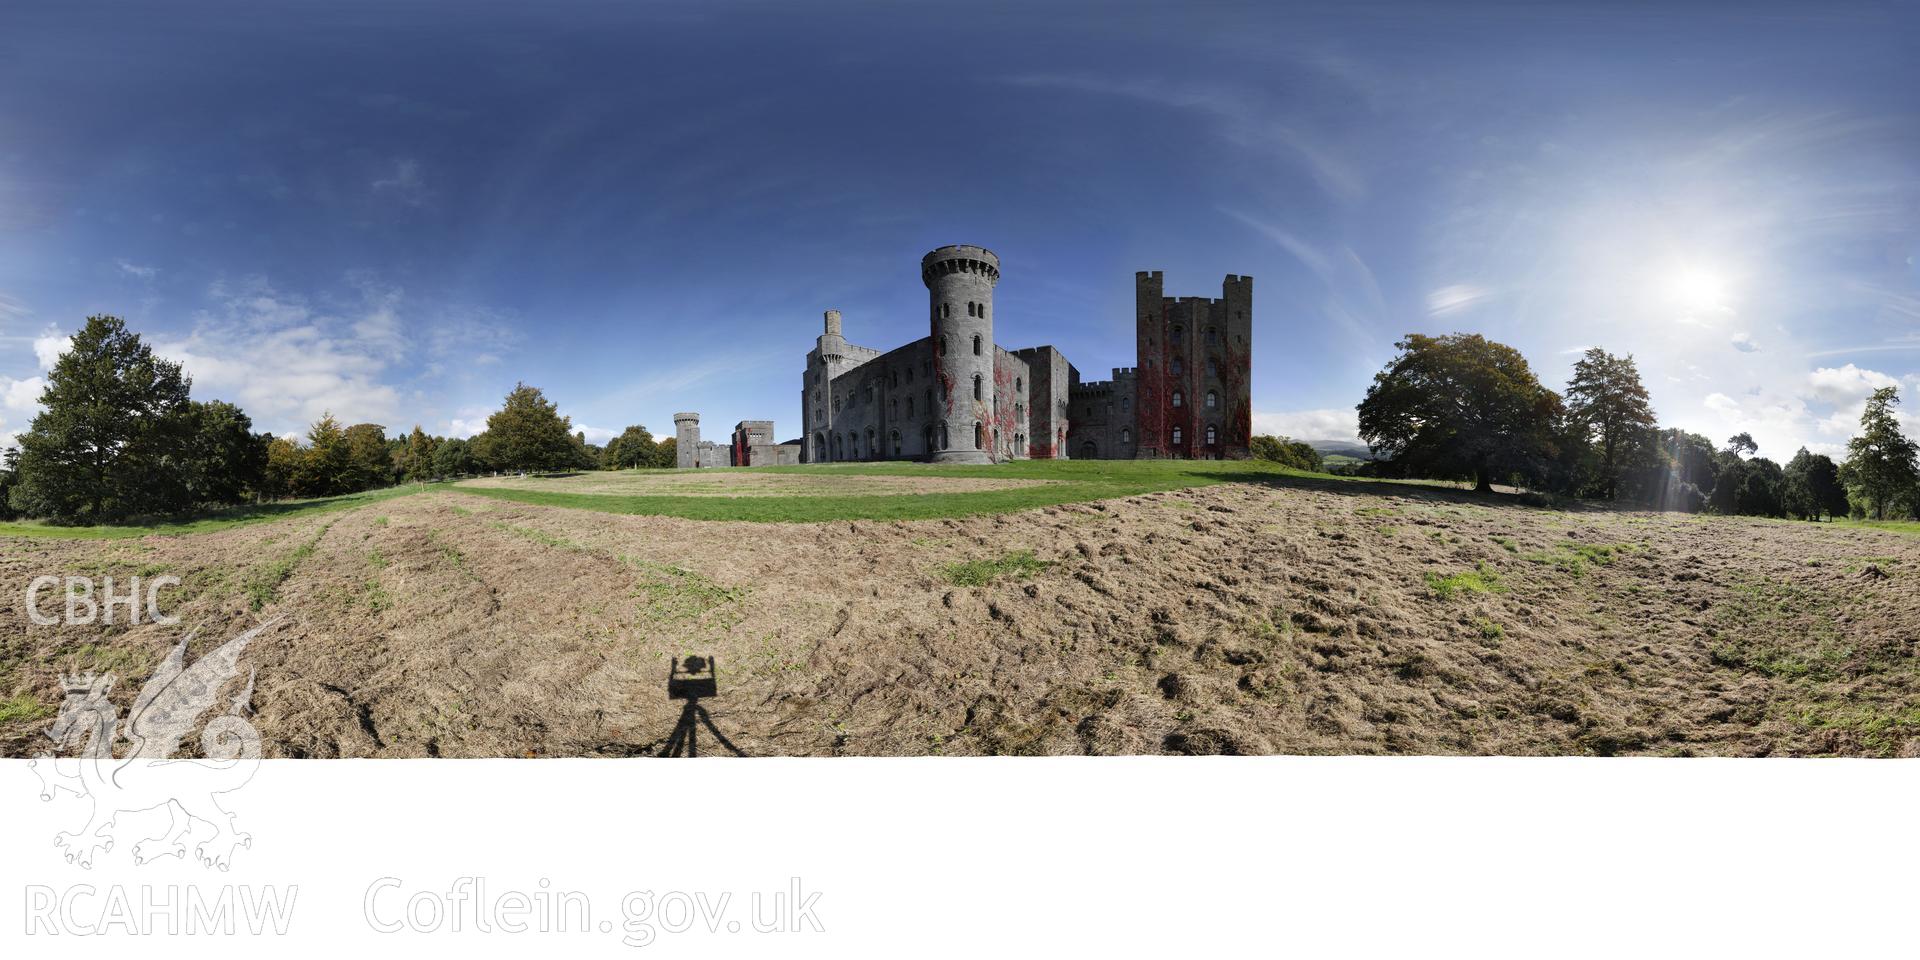 Reduced resolution Tiff of stitched images on the west side of Penrhyn Castle produced by Susan Fielding and Rita Singer, October 2017. Produced through European Travellers to Wales project.